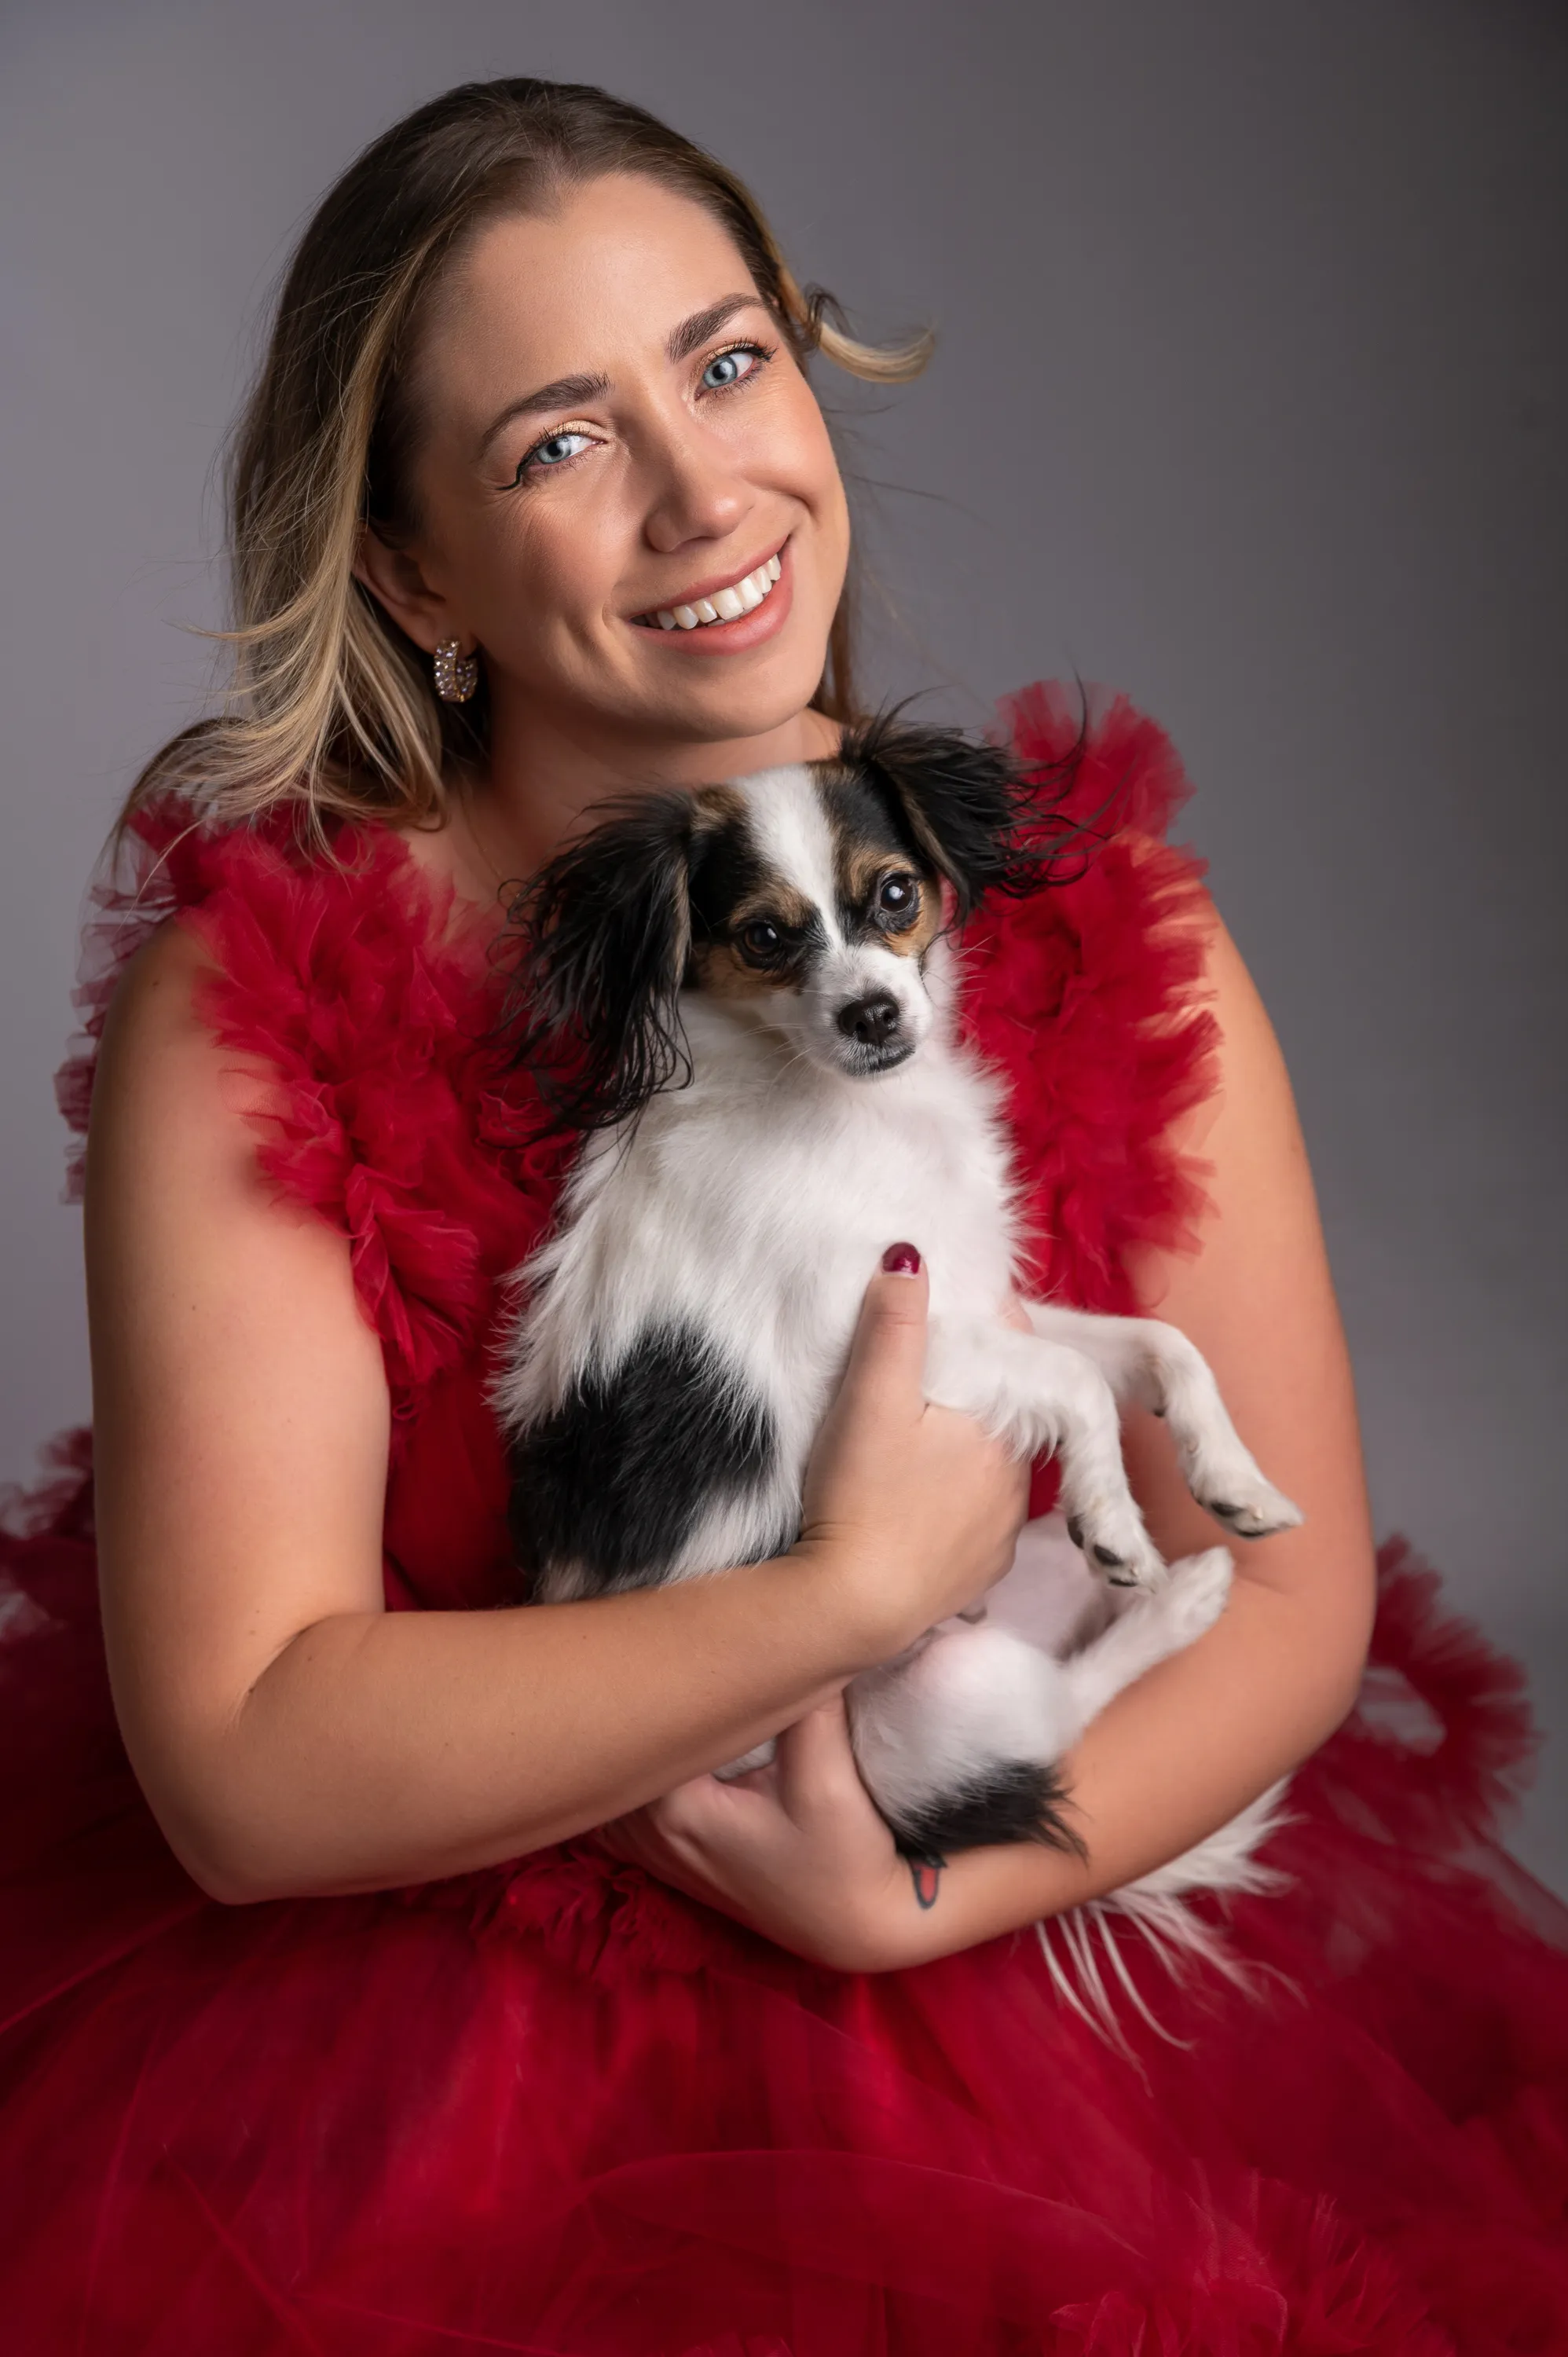 Woman in red dress with small dog